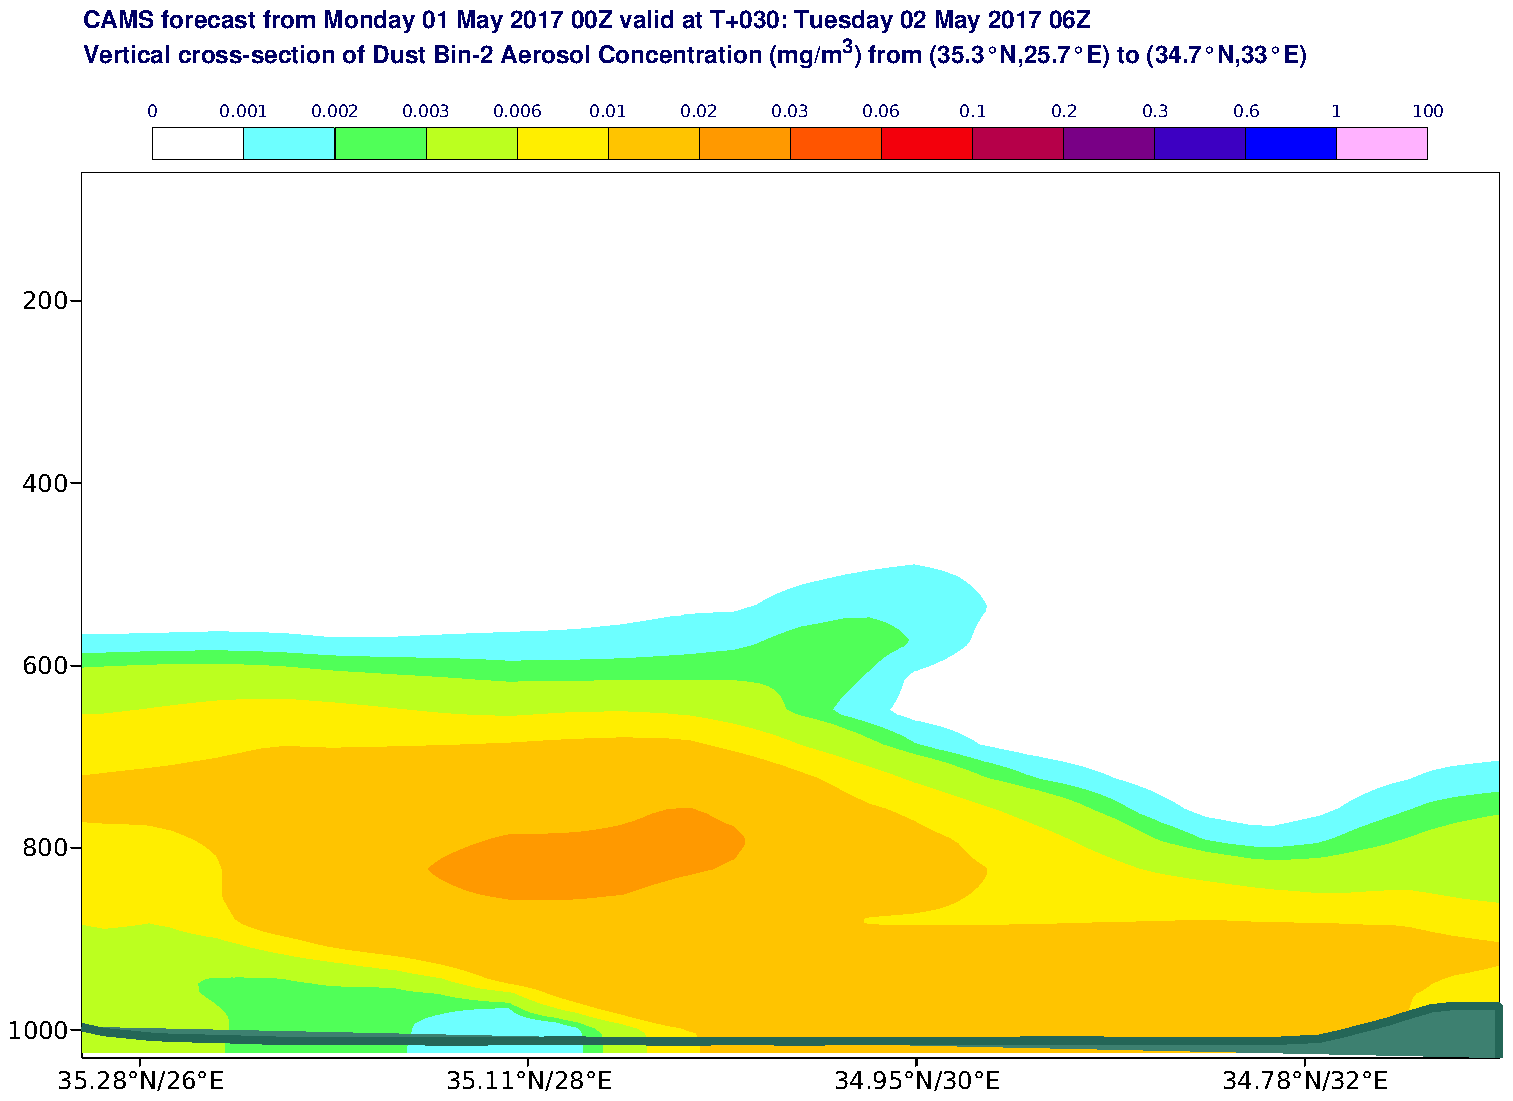 Vertical cross-section of Dust Bin-2 Aerosol Concentration (mg/m3) valid at T30 - 2017-05-02 06:00